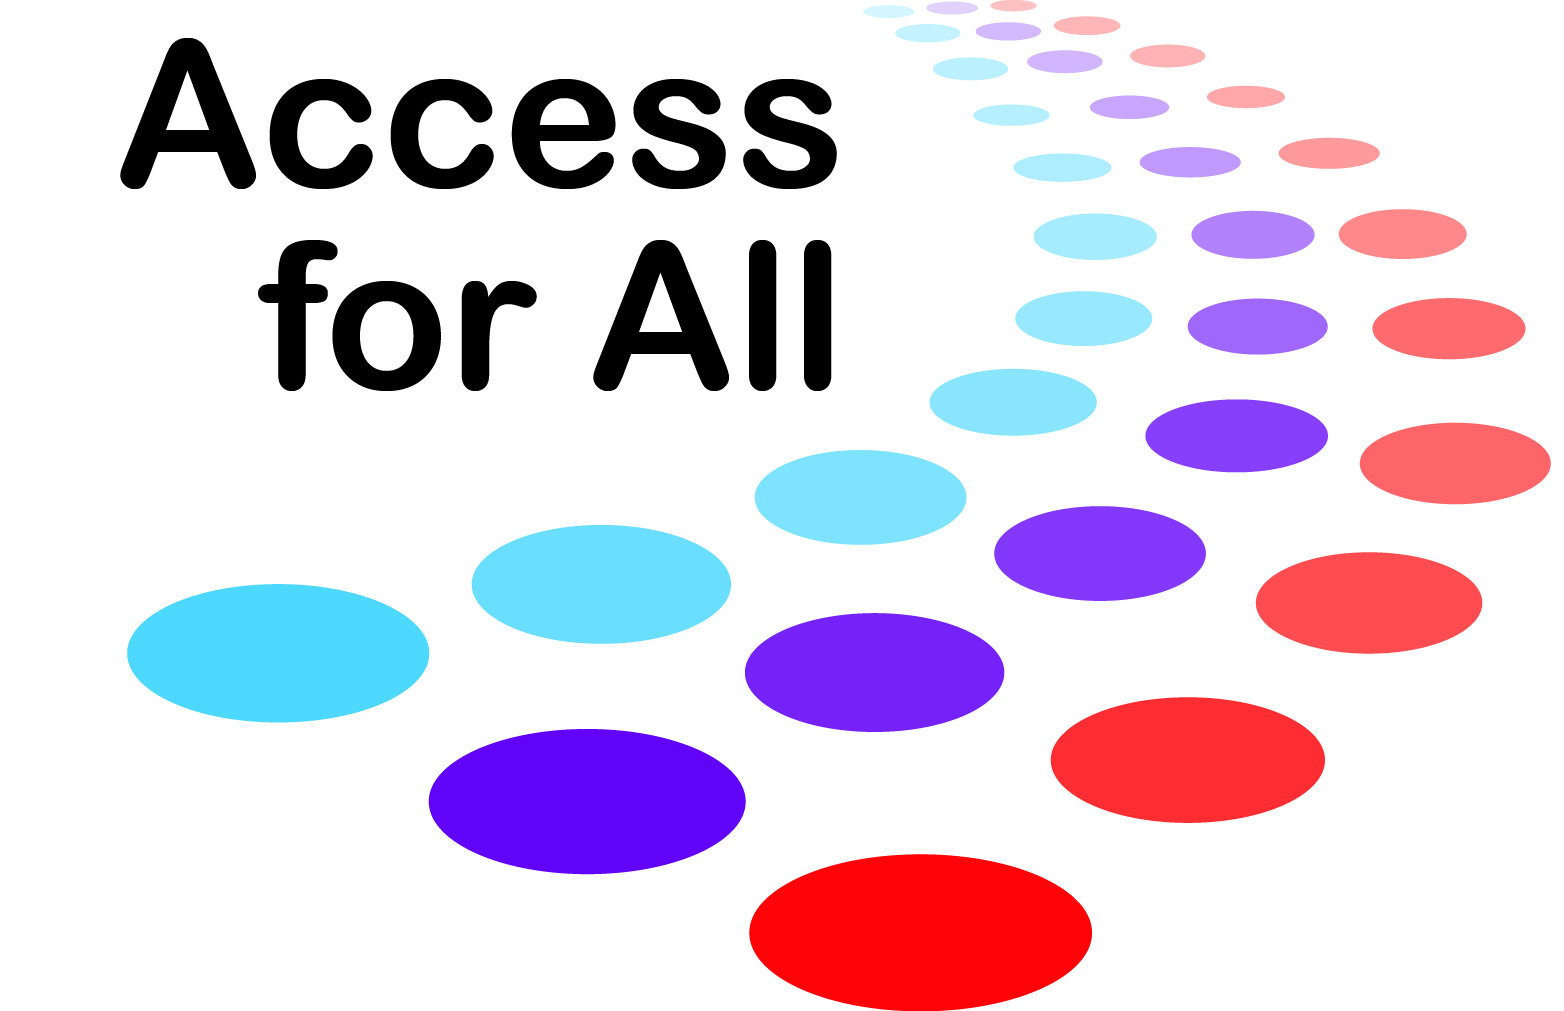 Access for All logo